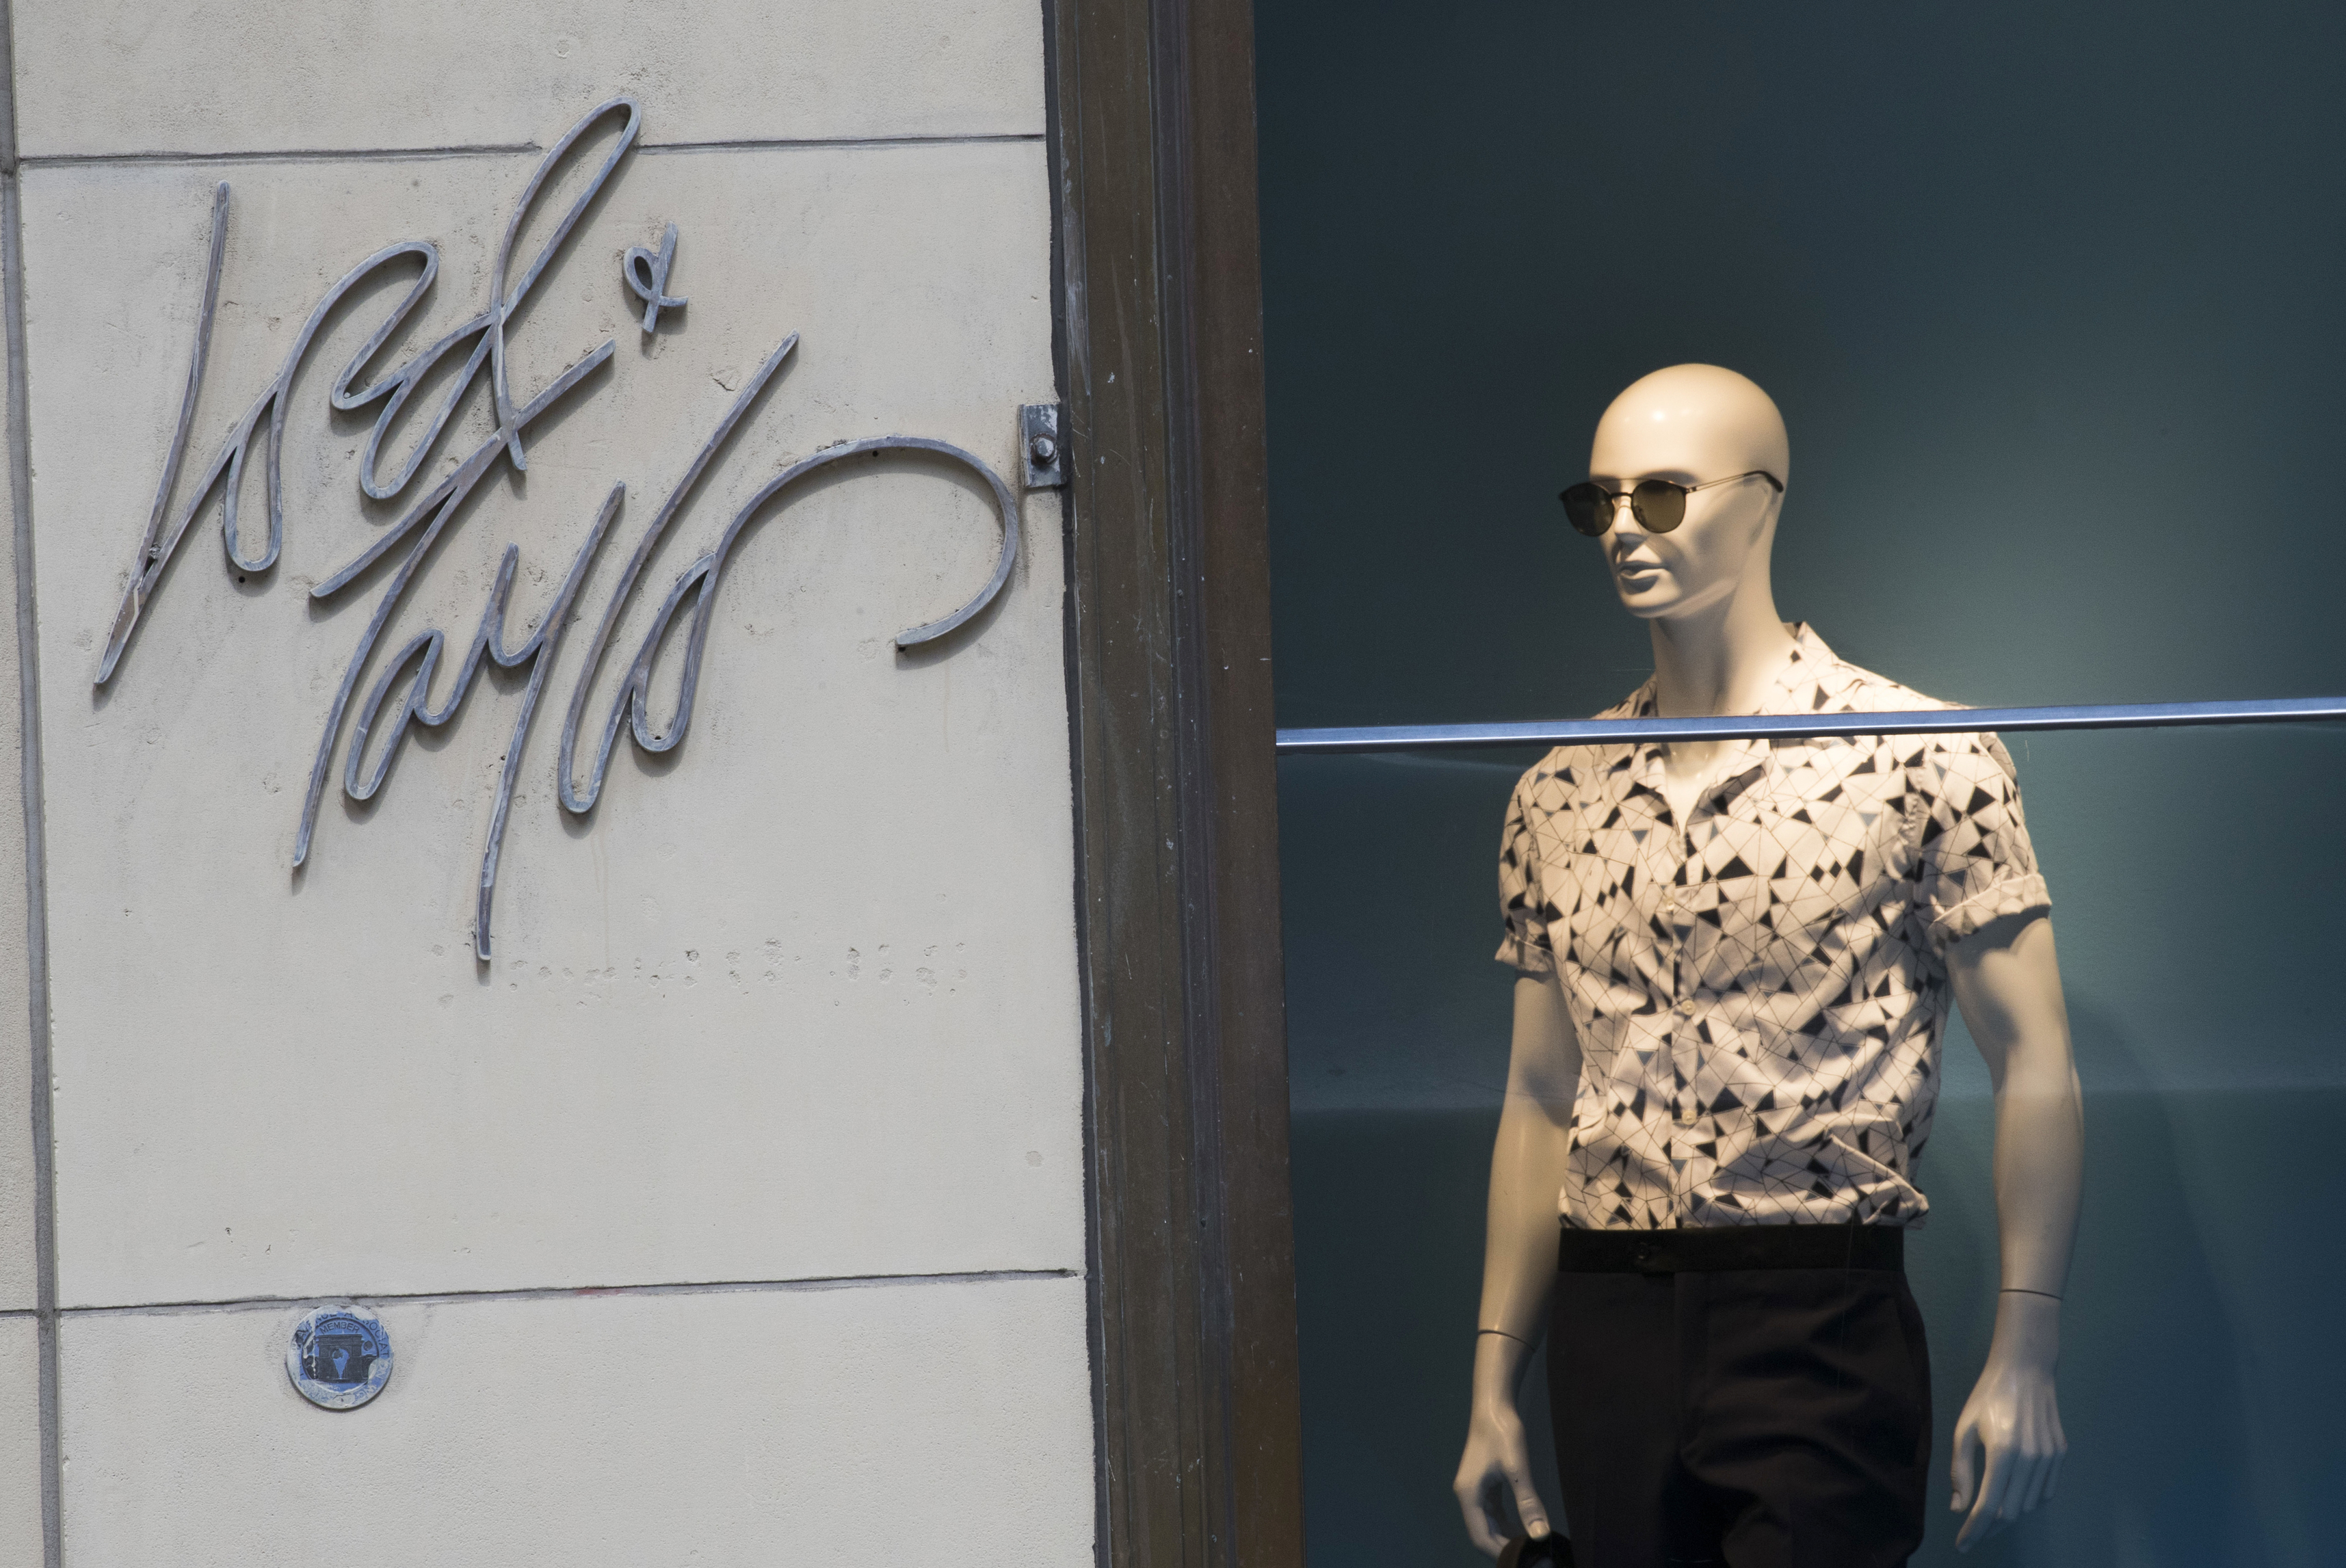 Lord & Taylor closing last Chicago-area stores - Chicago Sun-Times